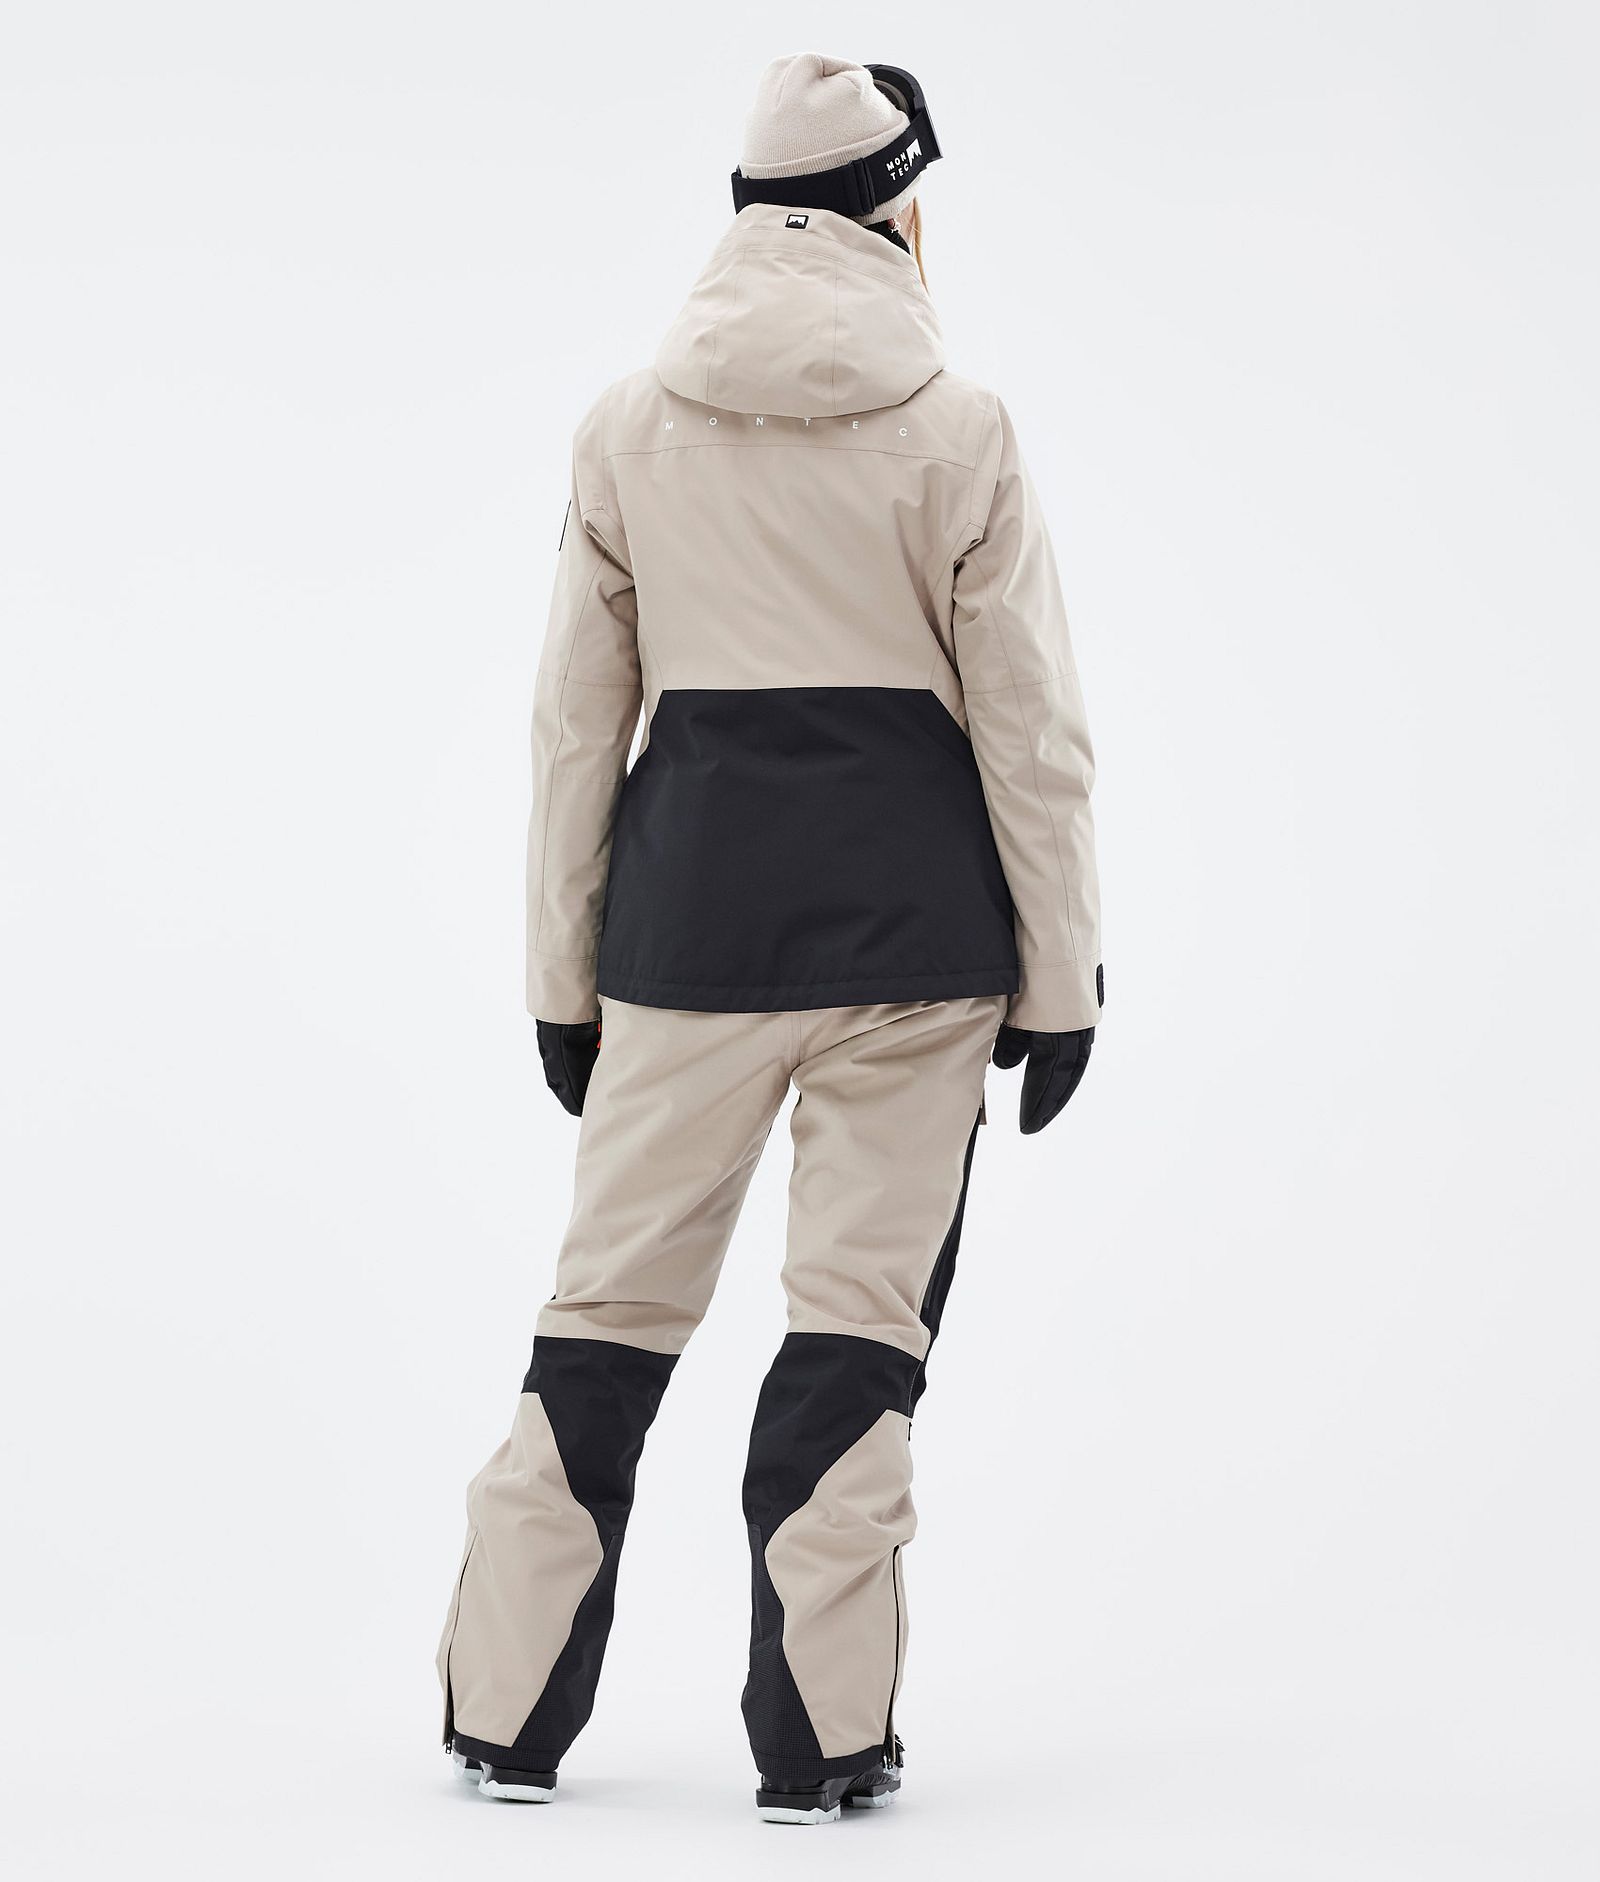 Moss W Ski Outfit Women Sand/Black, Image 2 of 2